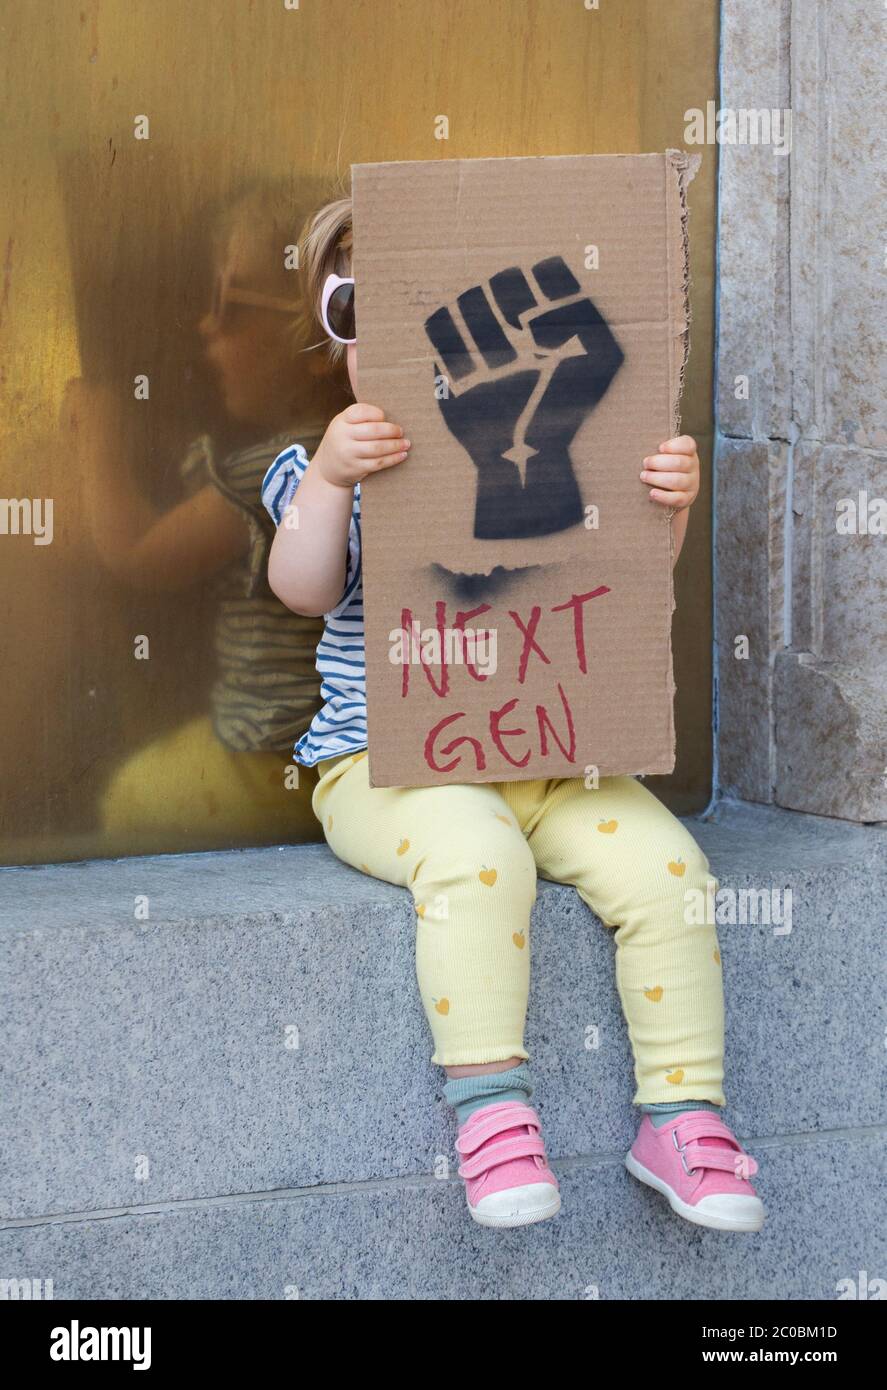 A young white toddler hides behind her sign showing an image of a black fist that symbolizes Black Lives Matter along with the words 'next-gen' during a June 7, 2020 protest in Hollywood California. Stock Photo